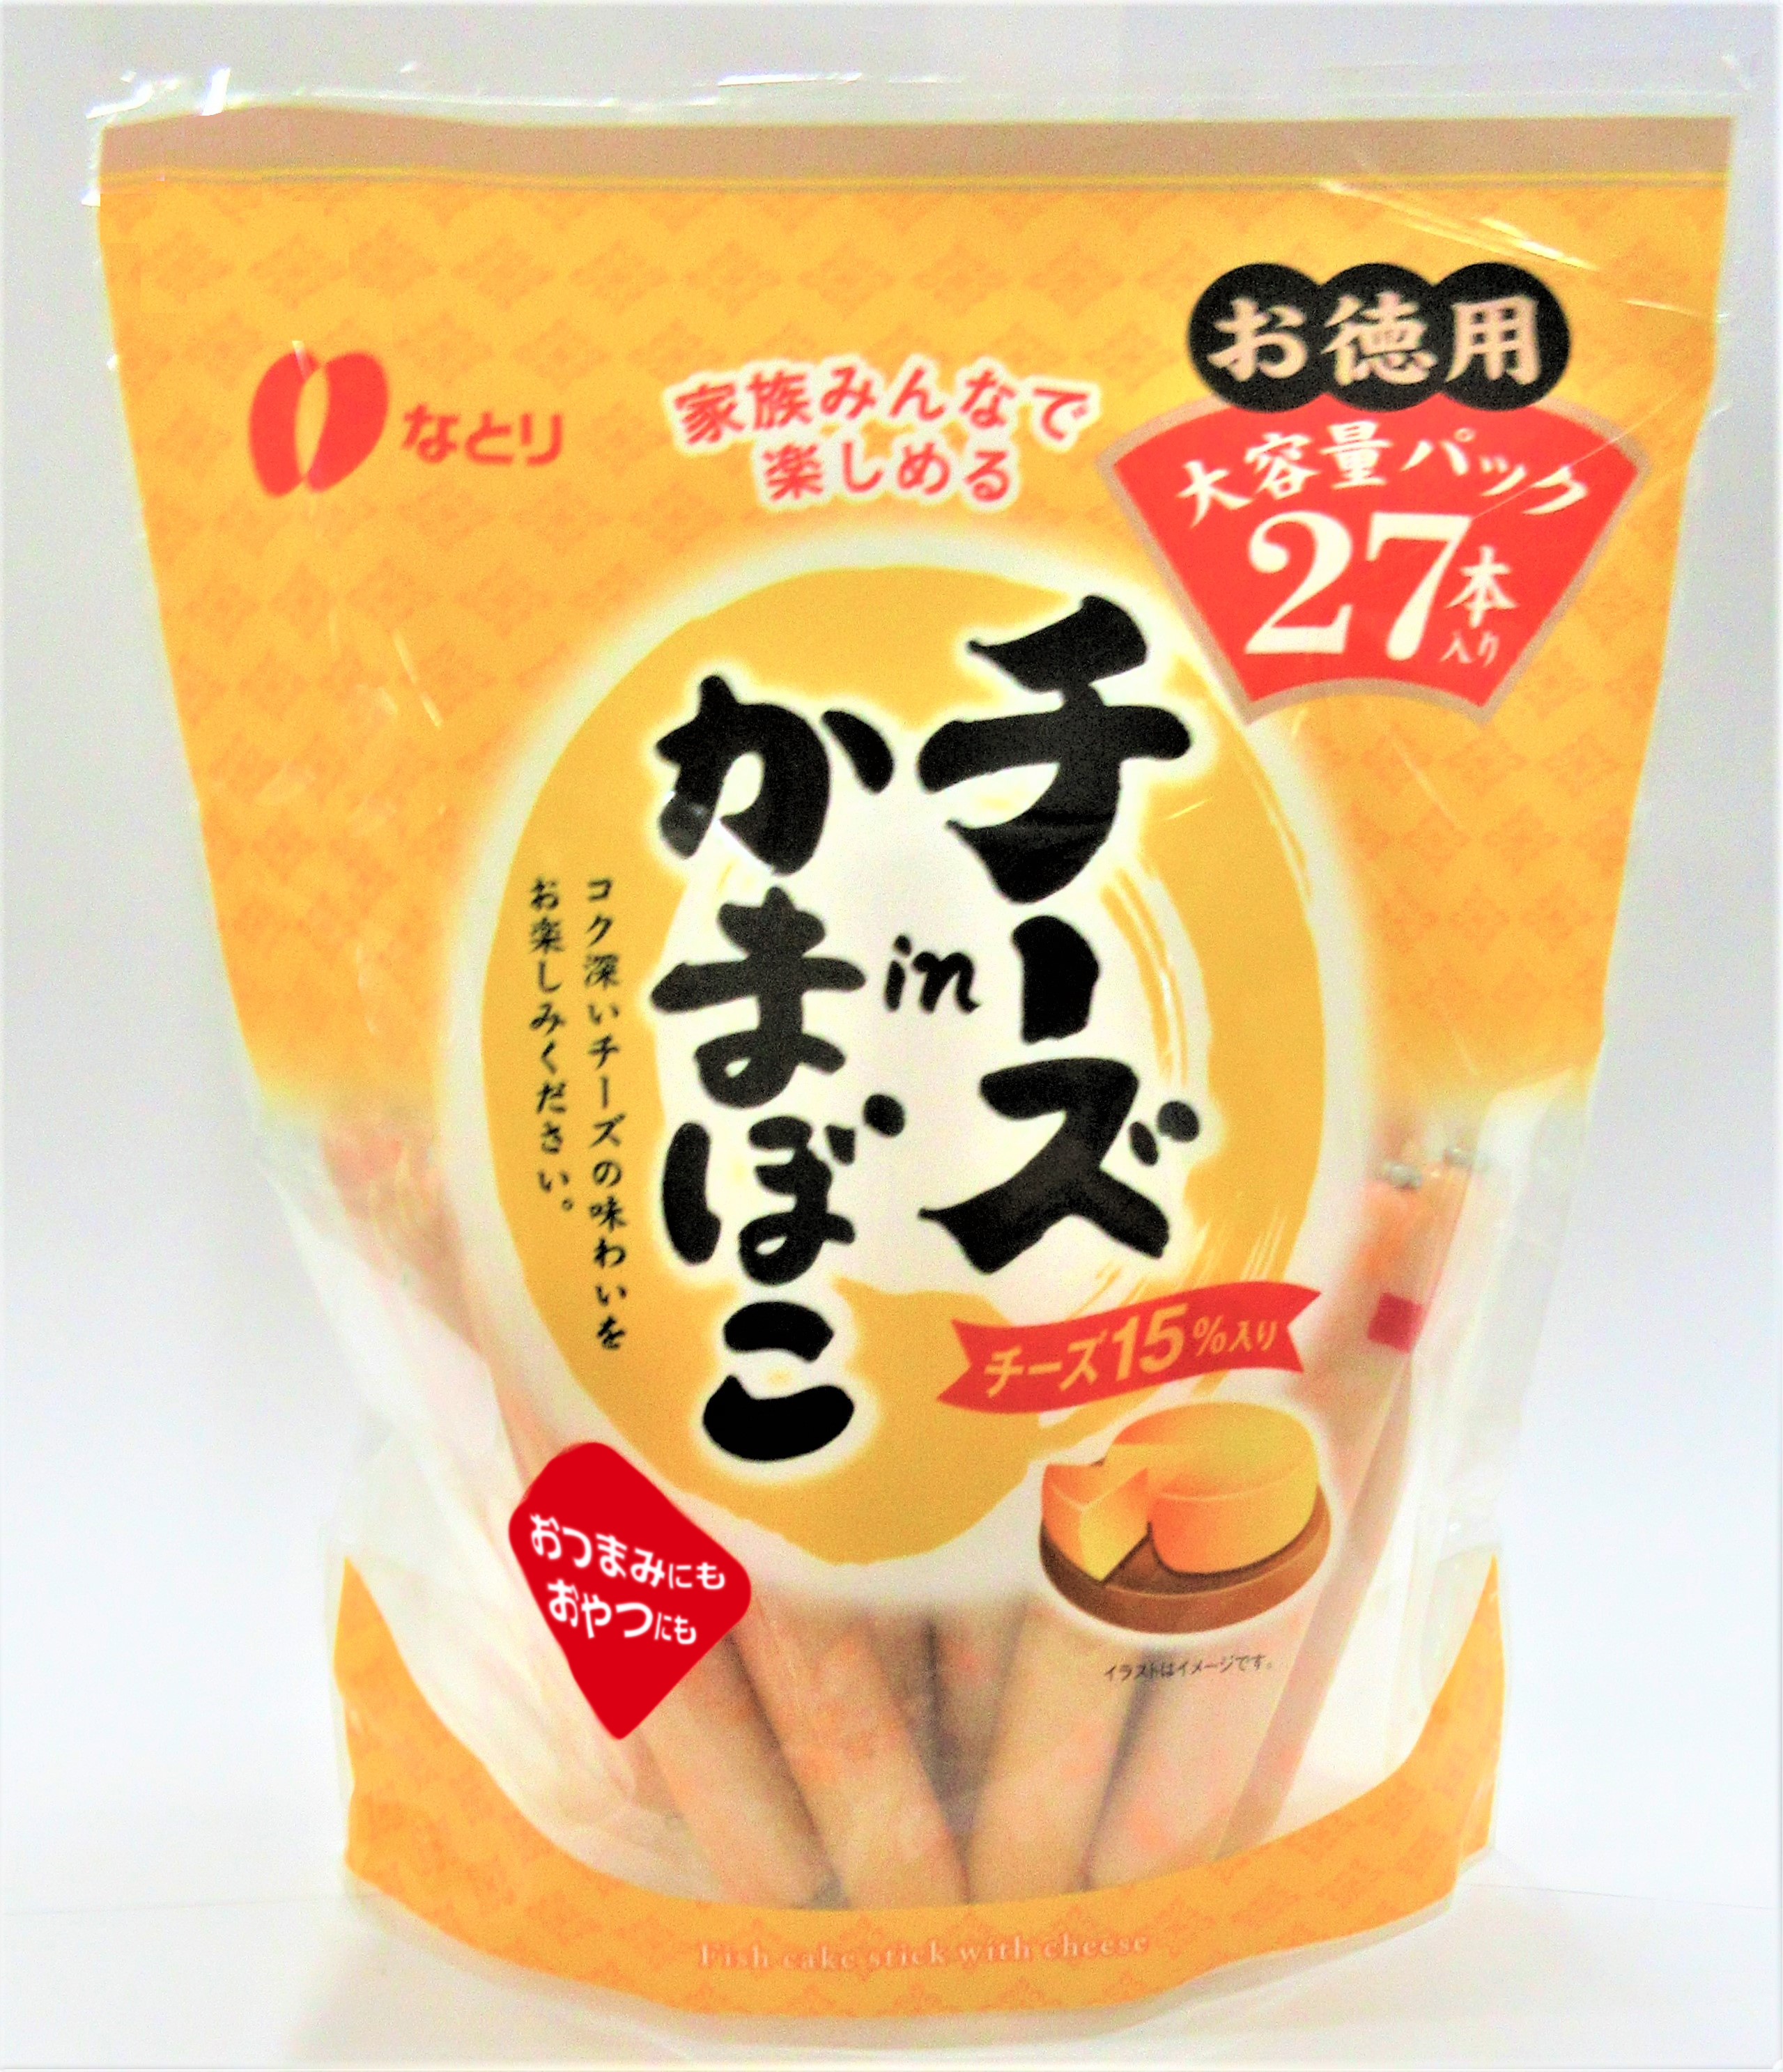 Cheese in kamaboko<br>ＢＩＧ ＰＡＣＫ